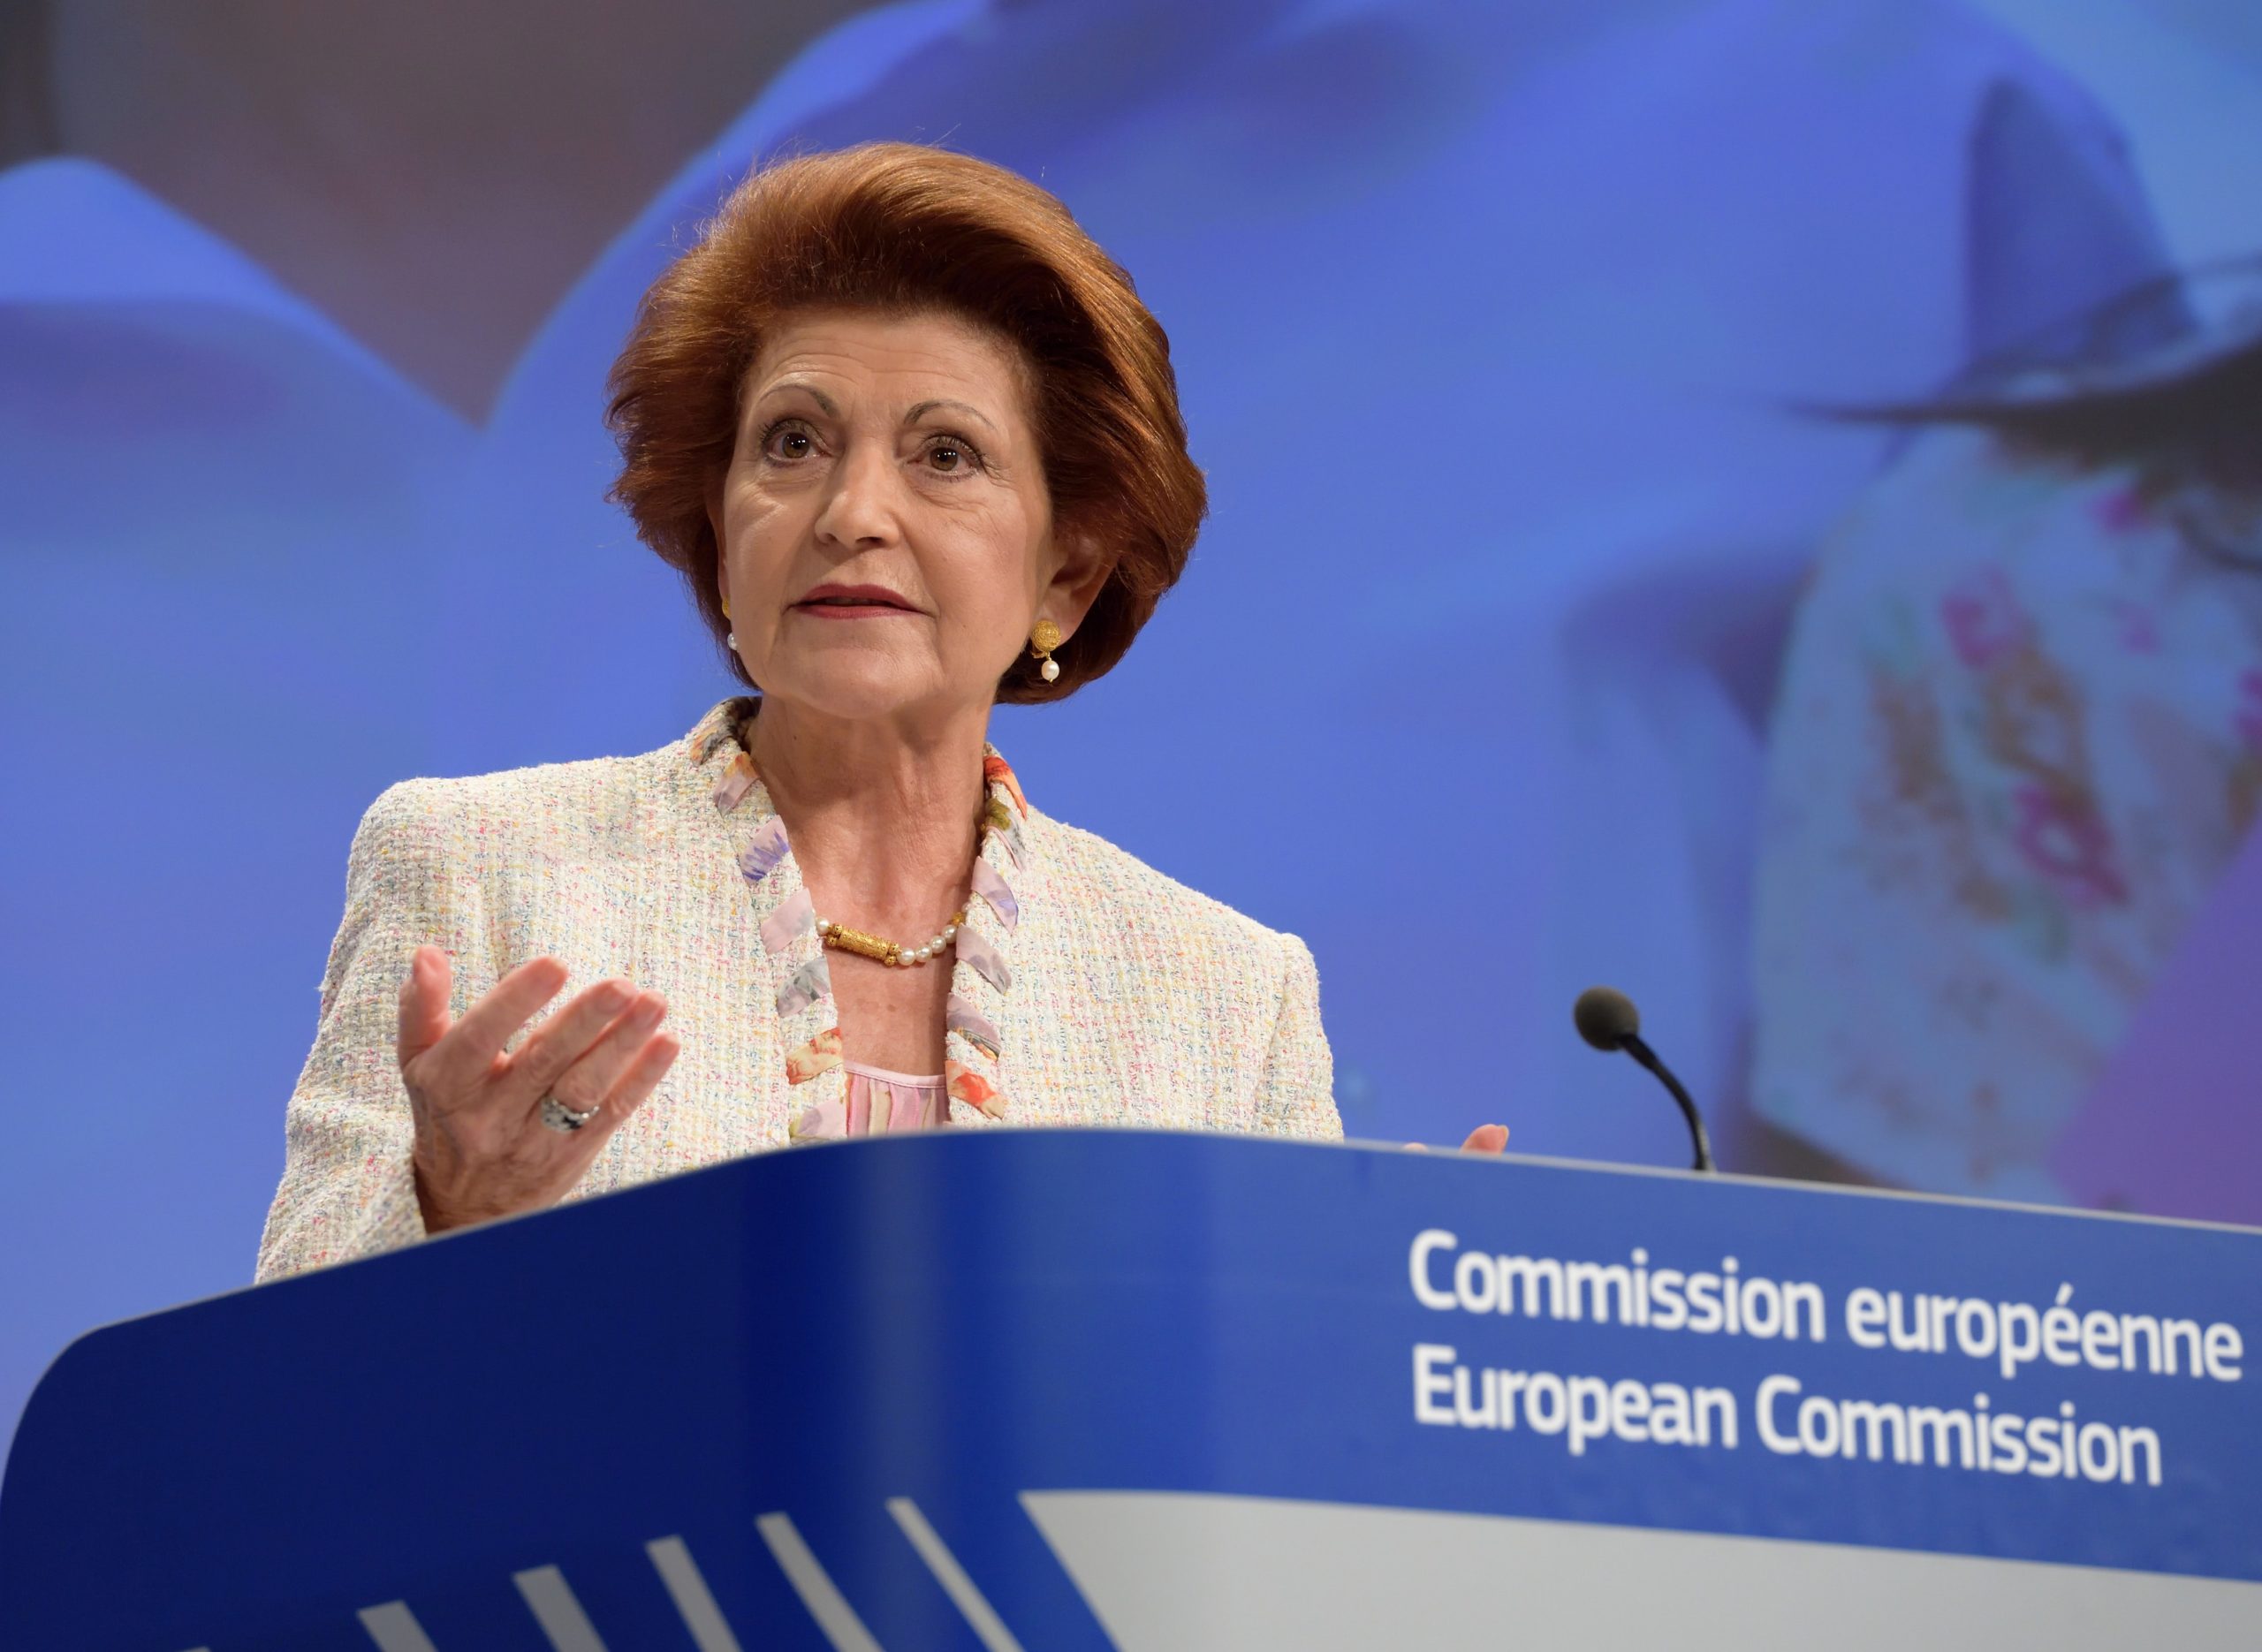 Androulla Vassiliou joins Van Rompuy on new CoR group